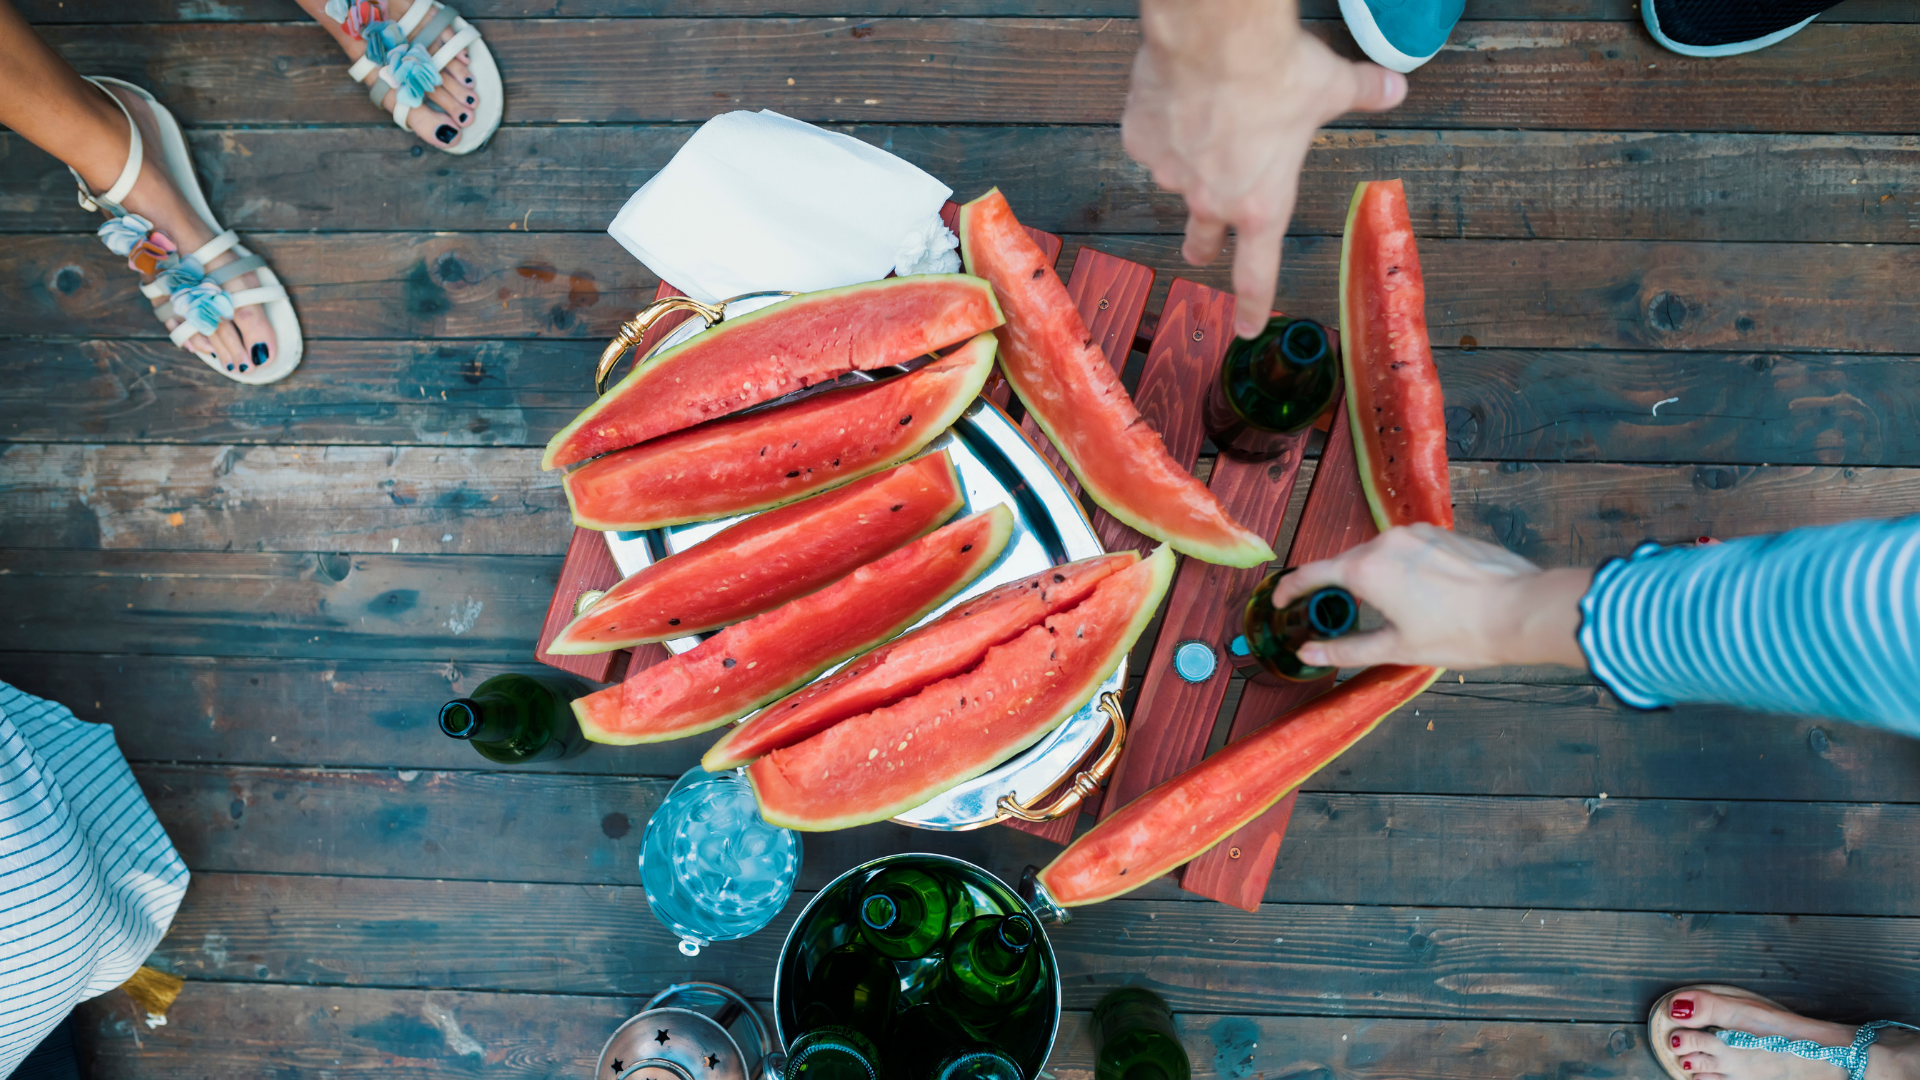 How do Italians keep cool in the SUMMER? 🌞 Watermelon parties and our homemade popsicle recipe!